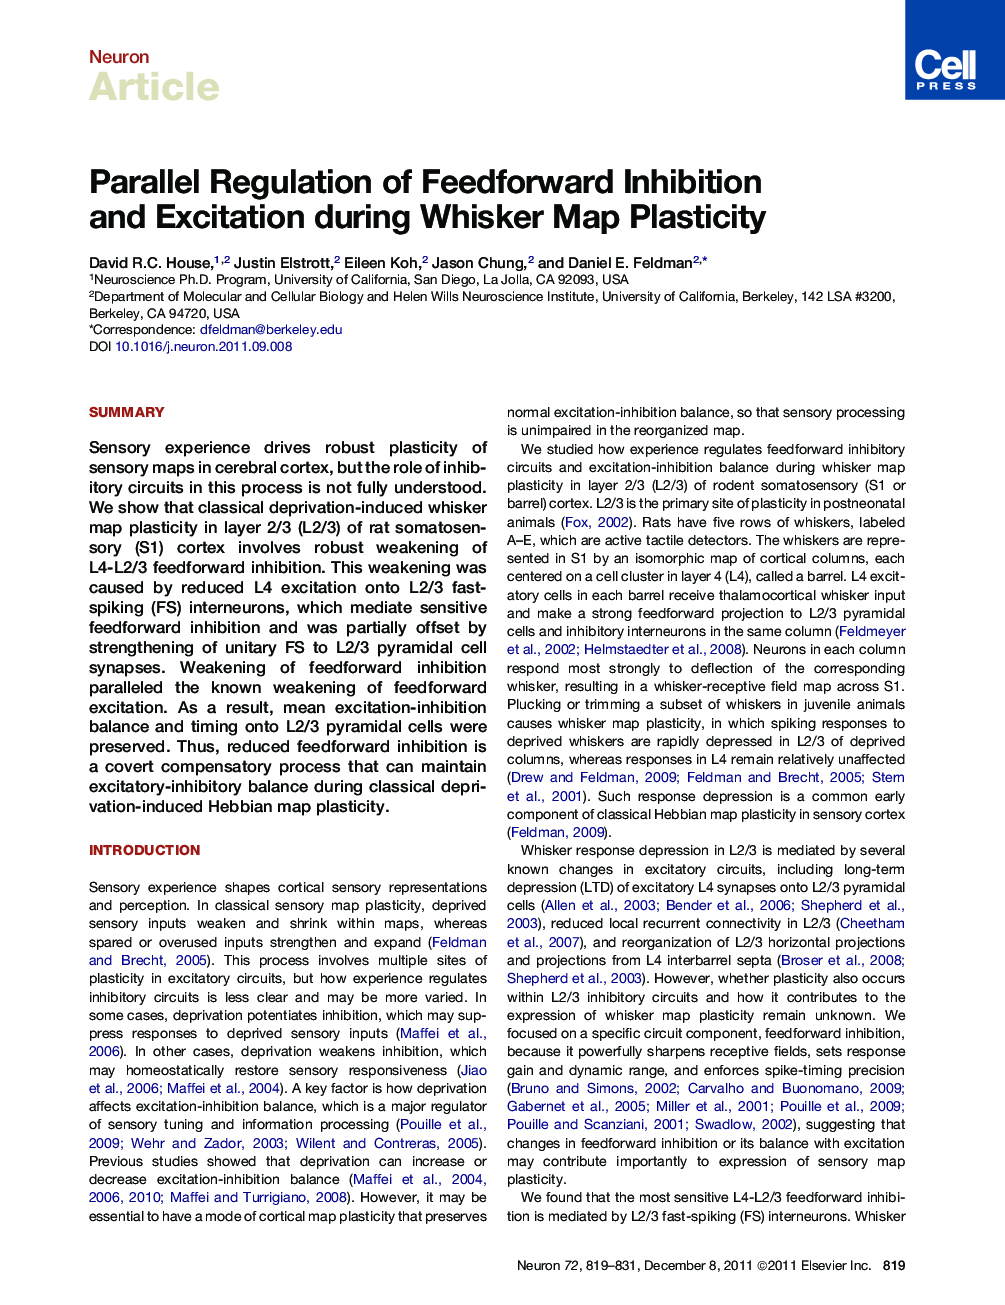 Parallel Regulation of Feedforward Inhibition and Excitation during Whisker Map Plasticity